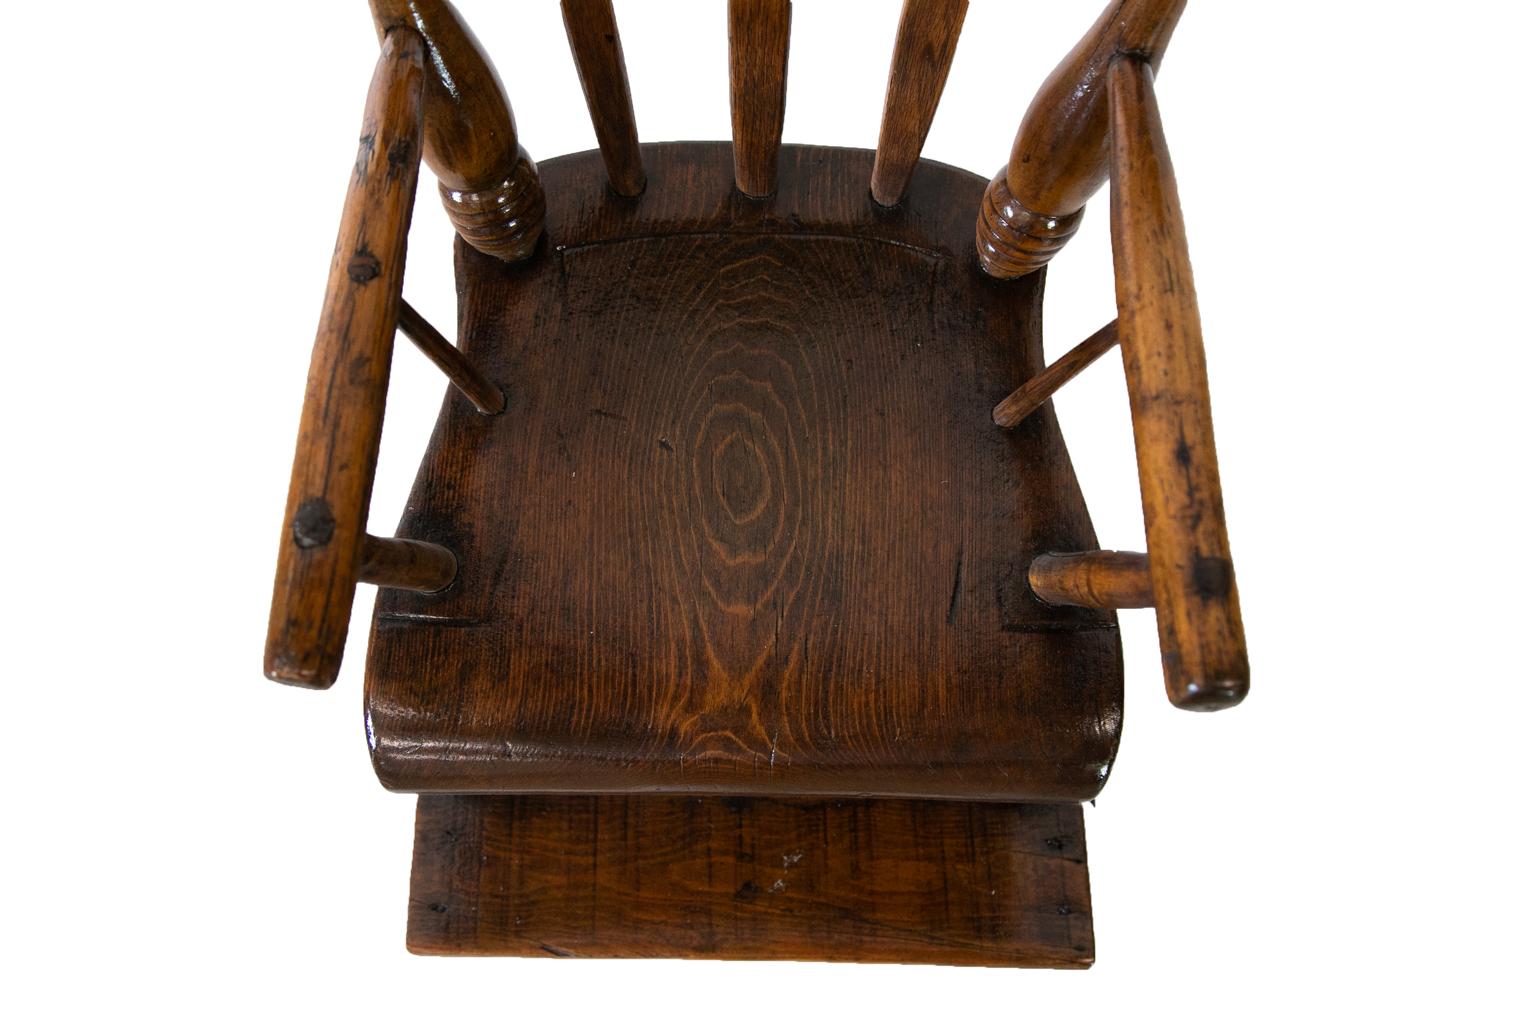 American arrow back high chair has a pine saddle seat and oak arrow splats. The legs and top are tulip poplar. The seat has incised decoration which is partially worn. The front legs have four turned bands at the top of the legs and two below the